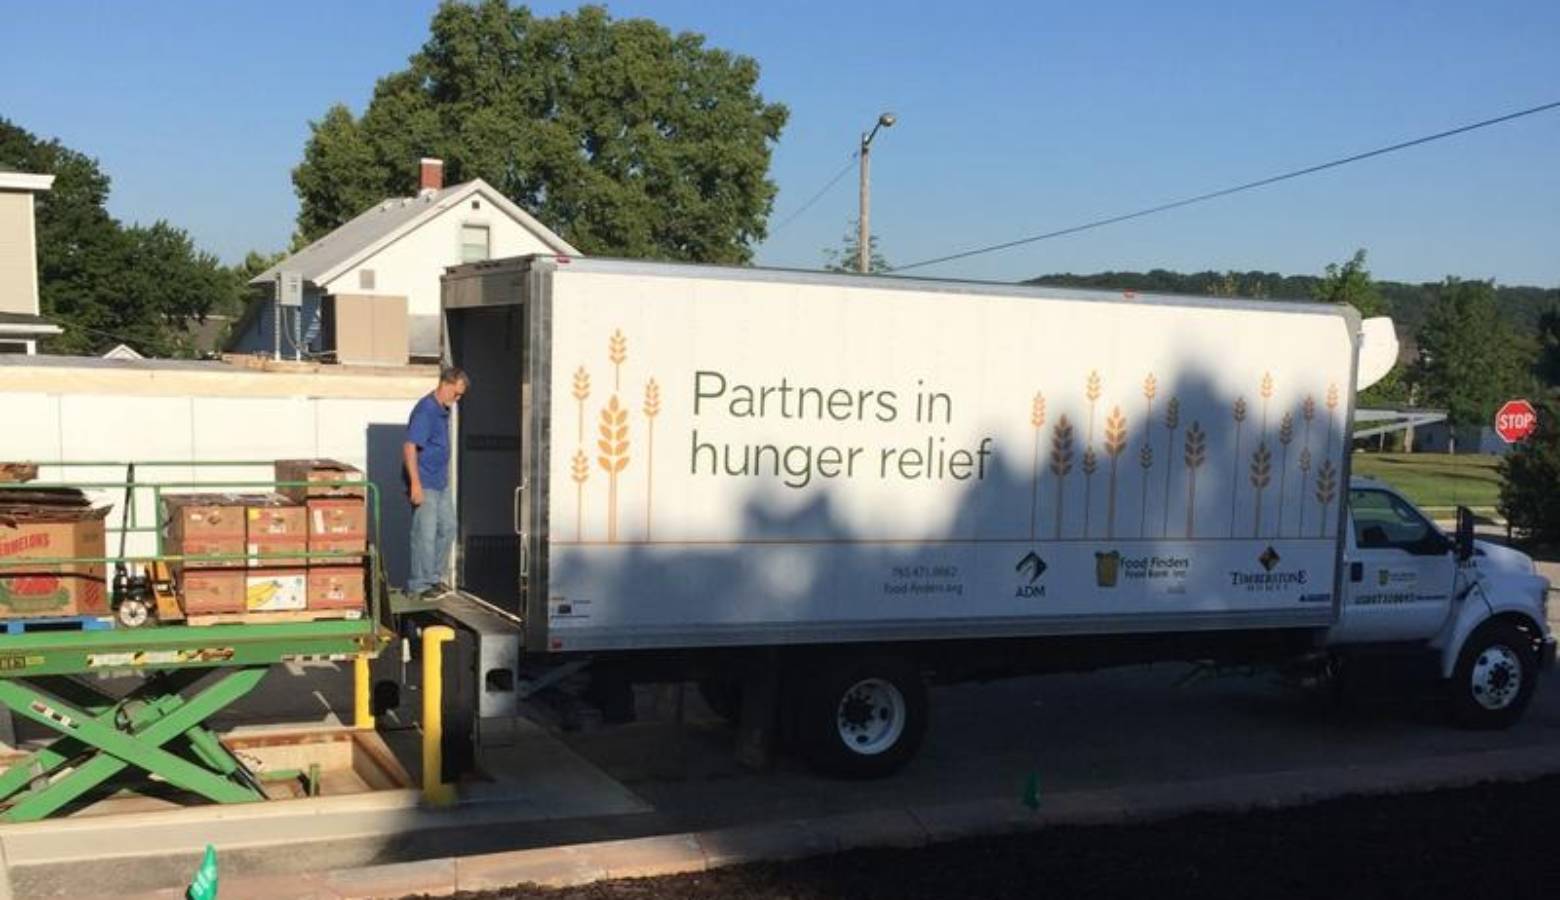 Food Finders is one of the Indiana food banks to receive funding. (FILE PHOTO: Jill Sheridan/IPB News)